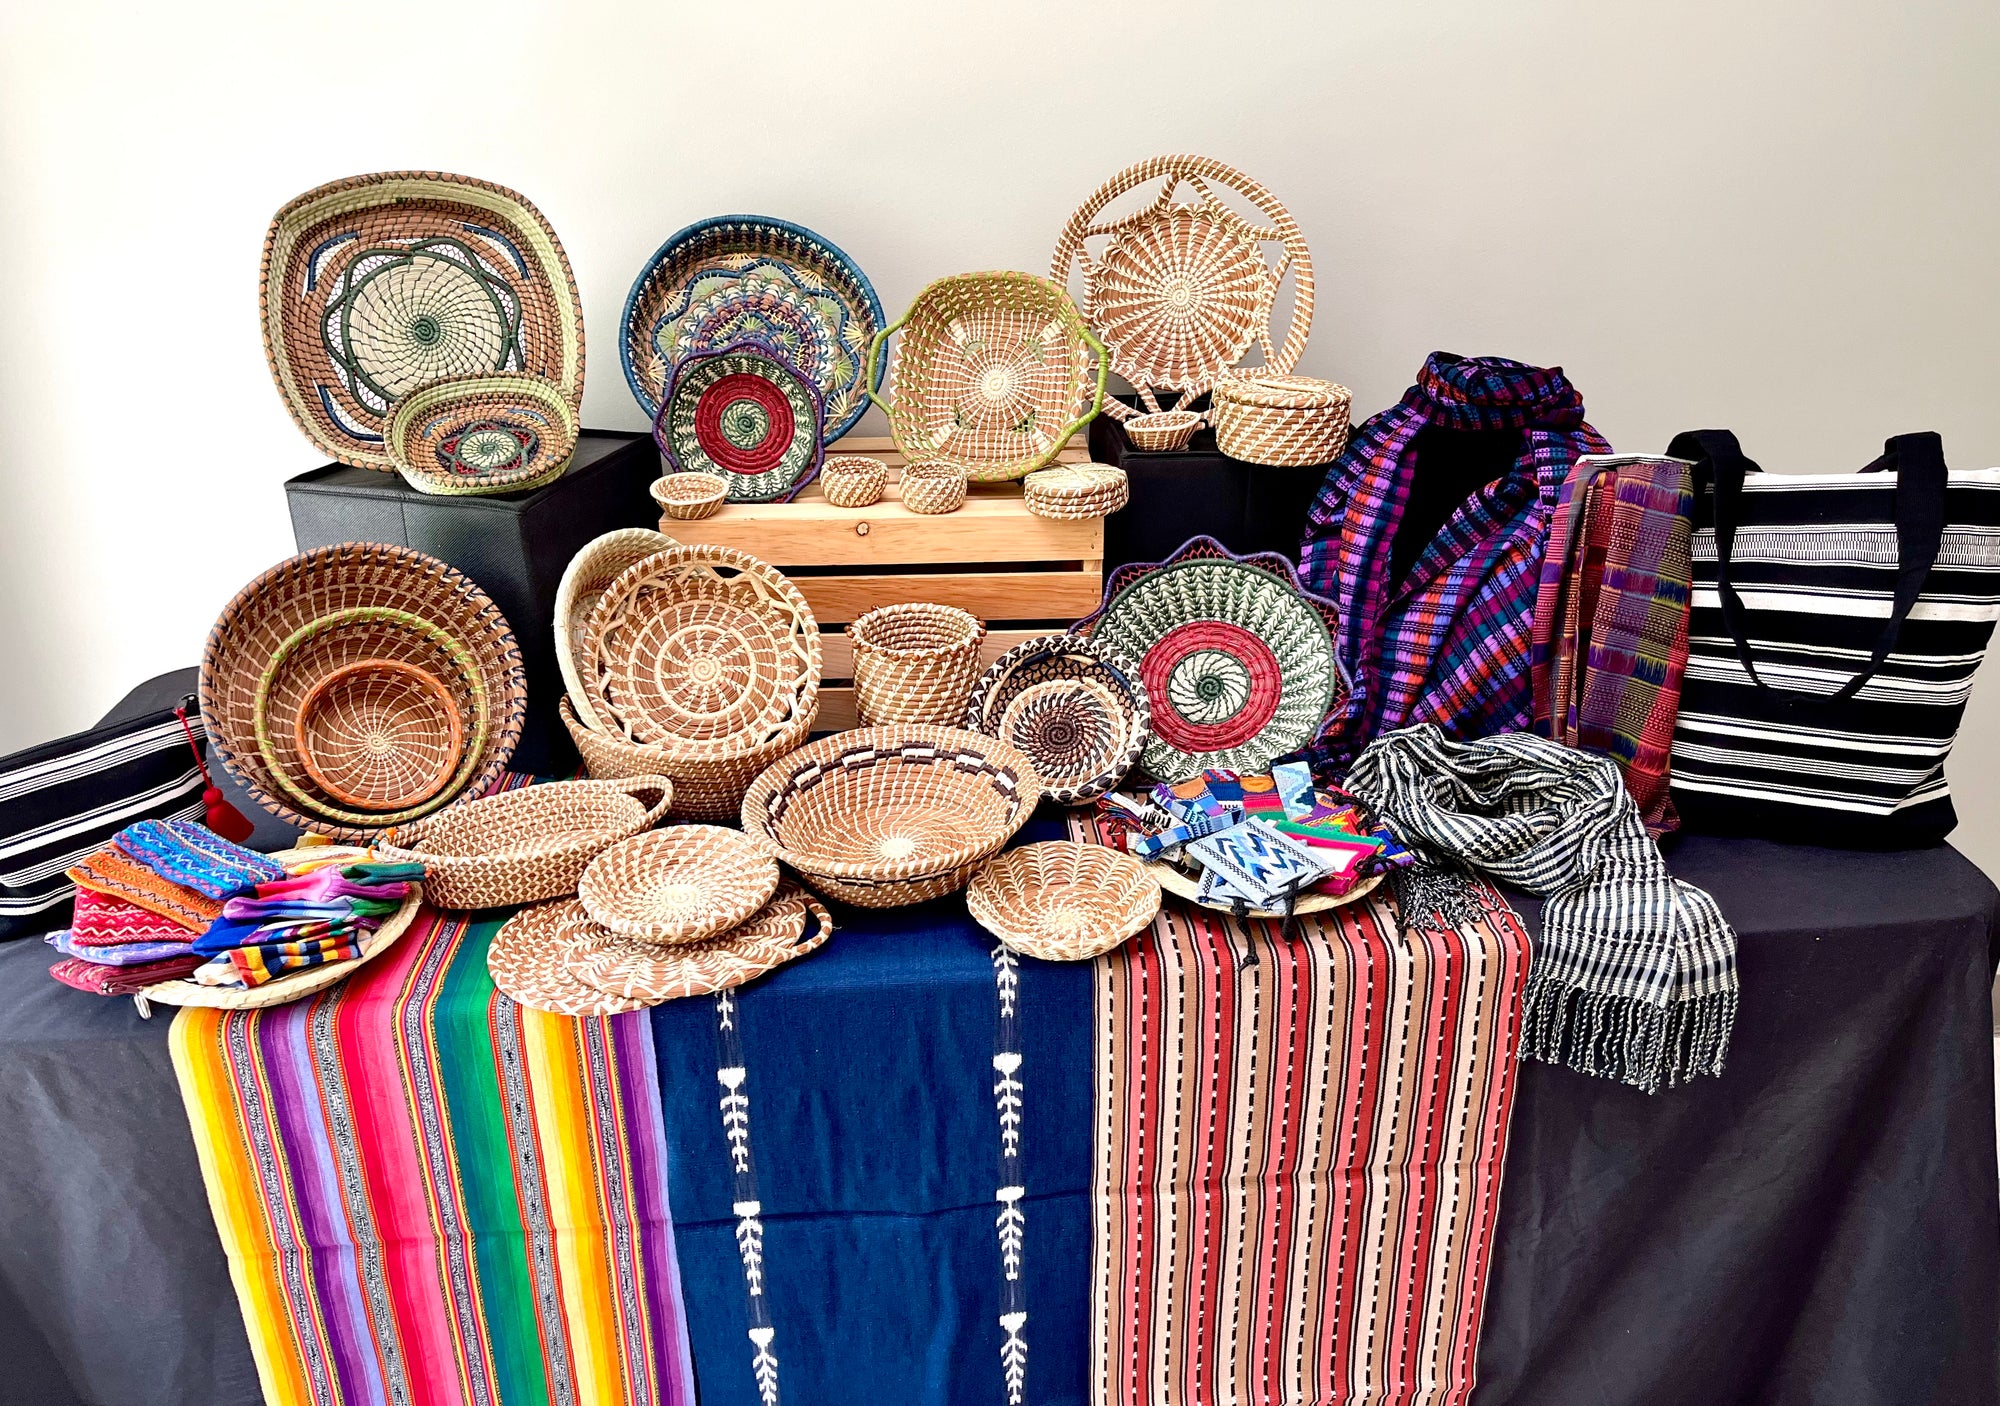 A beautiful assortment of handwoven table linens, pine needle baskets, and colorful scarves arranged in a tabletop display